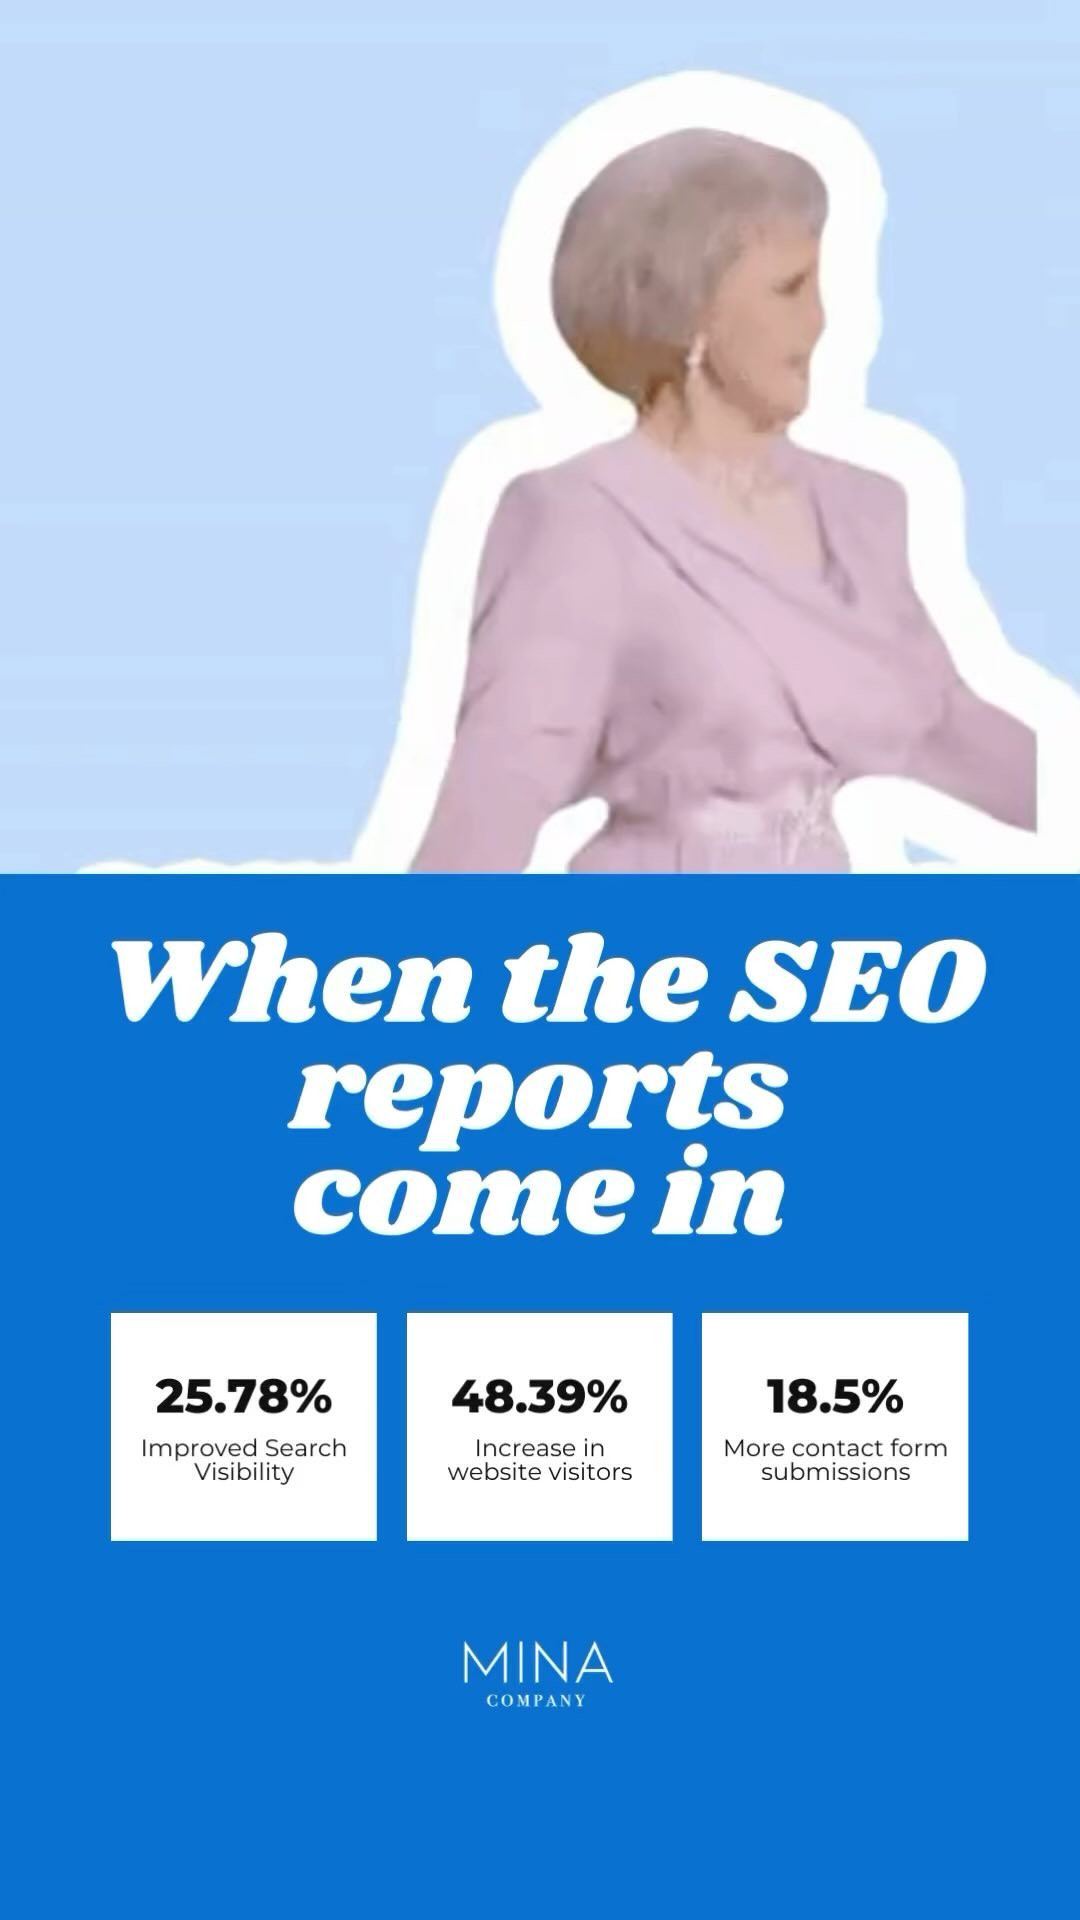 SEO is a game changer for your small business. If you haven’t thought about or invested in SEO - now is the time!⏰

We’re offering a full website SEO setup for just $1,000* plus 3 months of reporting. 😱🤩🤯

Great SEO leads ideal clients to your digital and physical front door! It’s also the number one ☝️ thing we believe all small businesses should be doing when it comes to marketing. ✅

👀Ready to take advantage of this offer and start seeing your business at the top of the search results? 

Comment “golden” below 👇🏽 to get started  now! 

#fortcollins #colorado #seostrategy #marketingtips #marketingonline #loveland #foco #nocowomen #seo